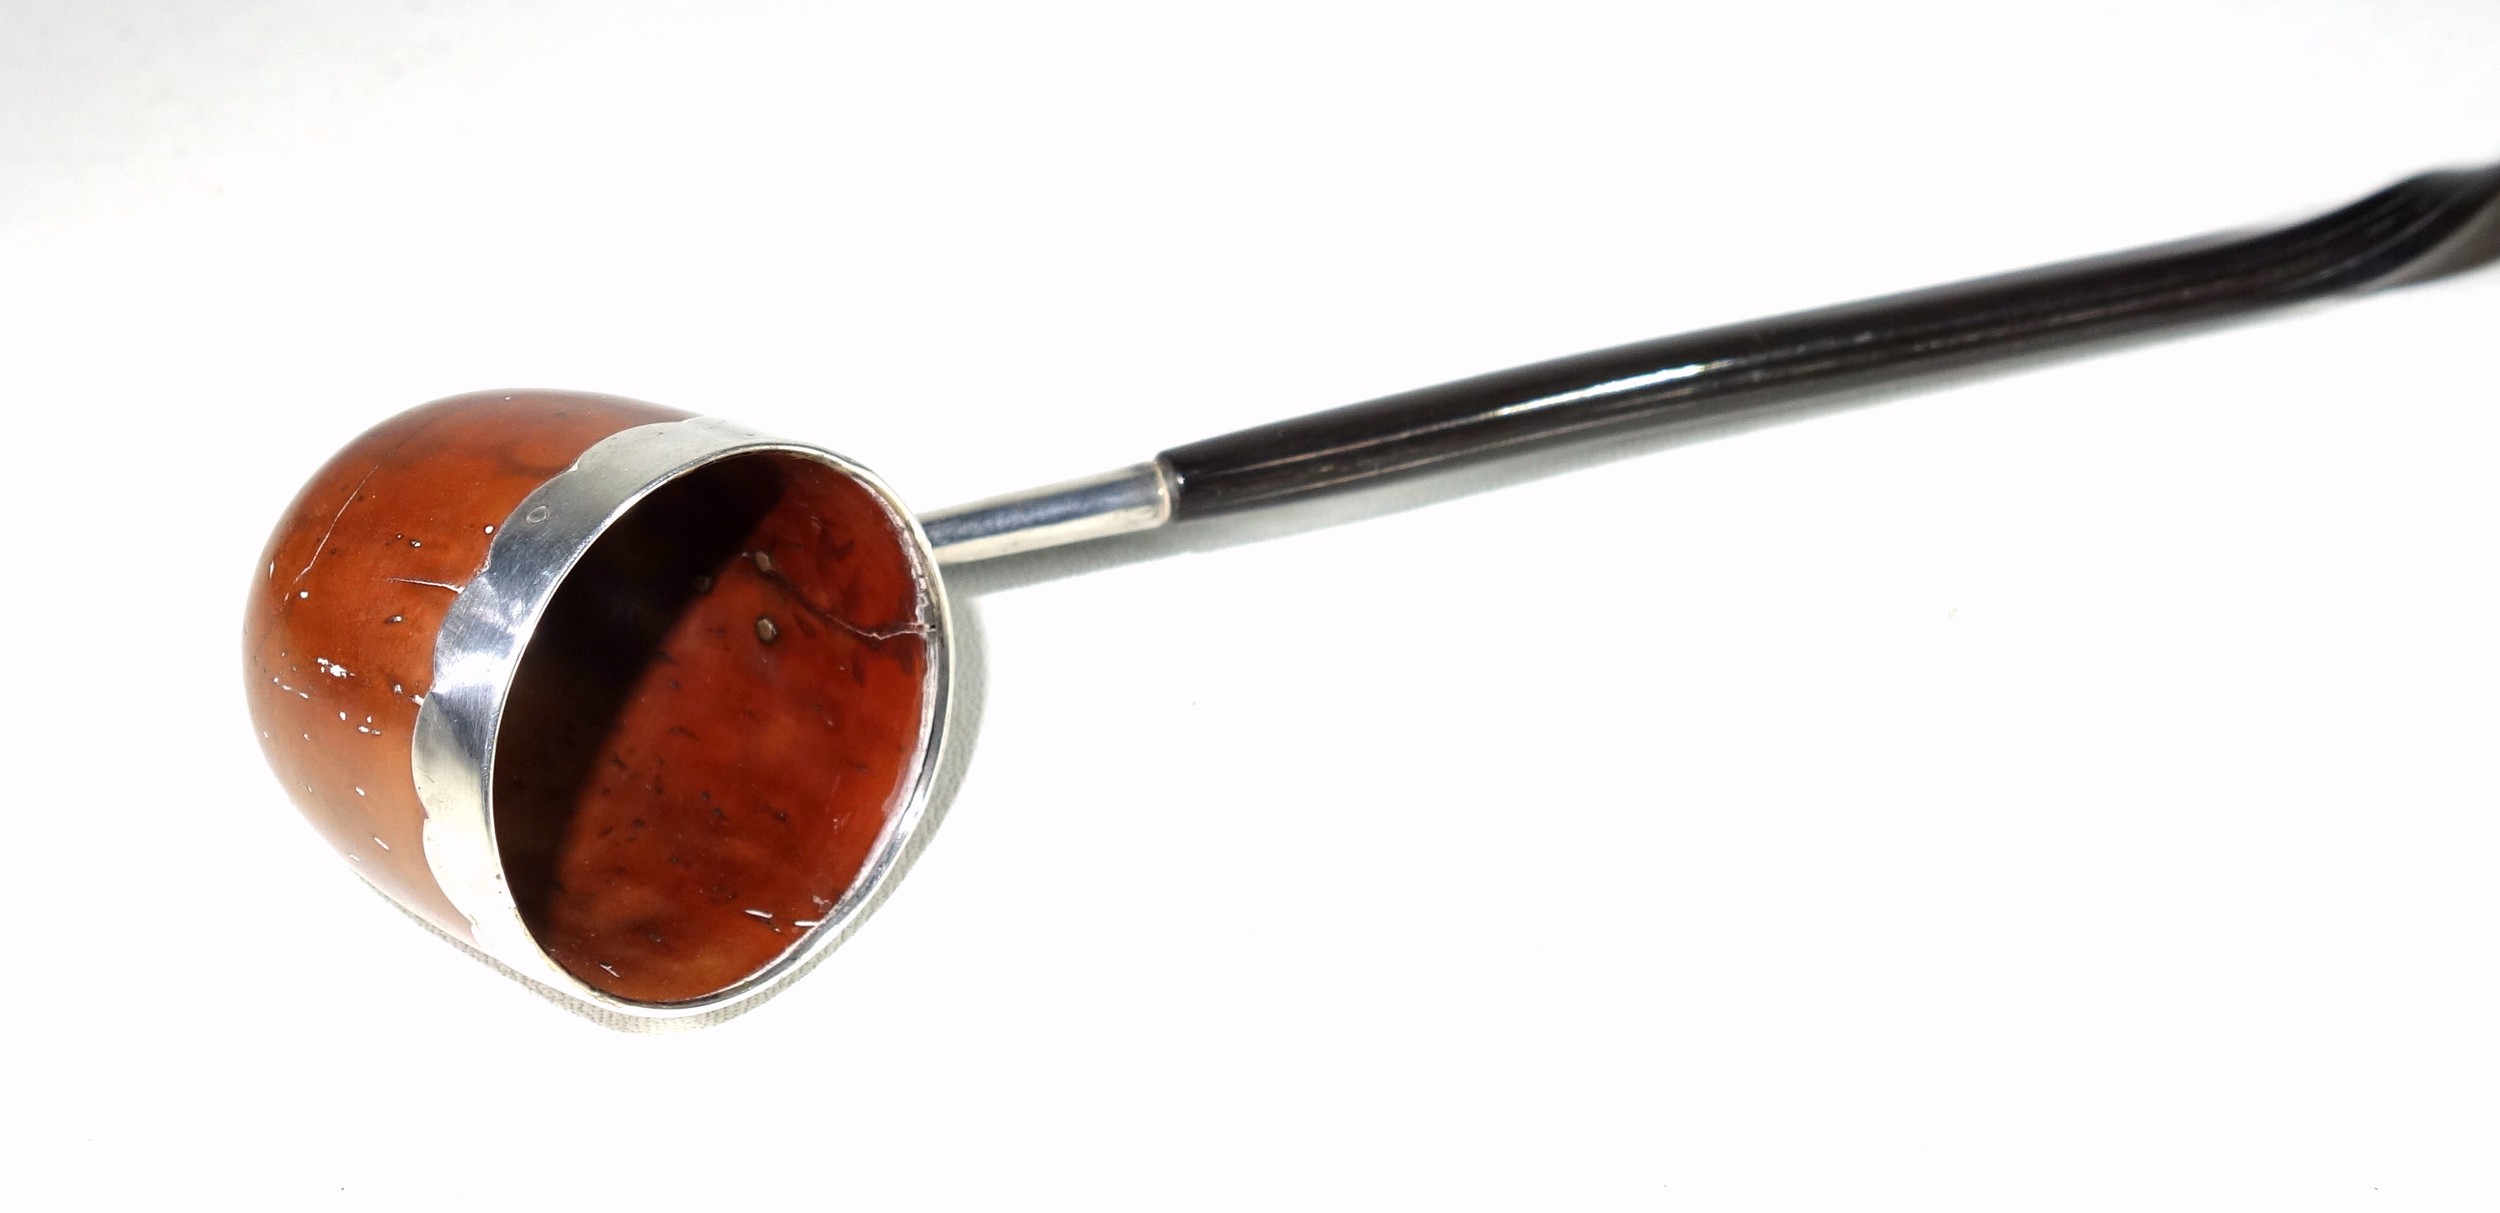 Georgian toddy ladle with a coquilla nut bowl and silver mounted rim, on a twisted whalebone handle, - Image 2 of 4